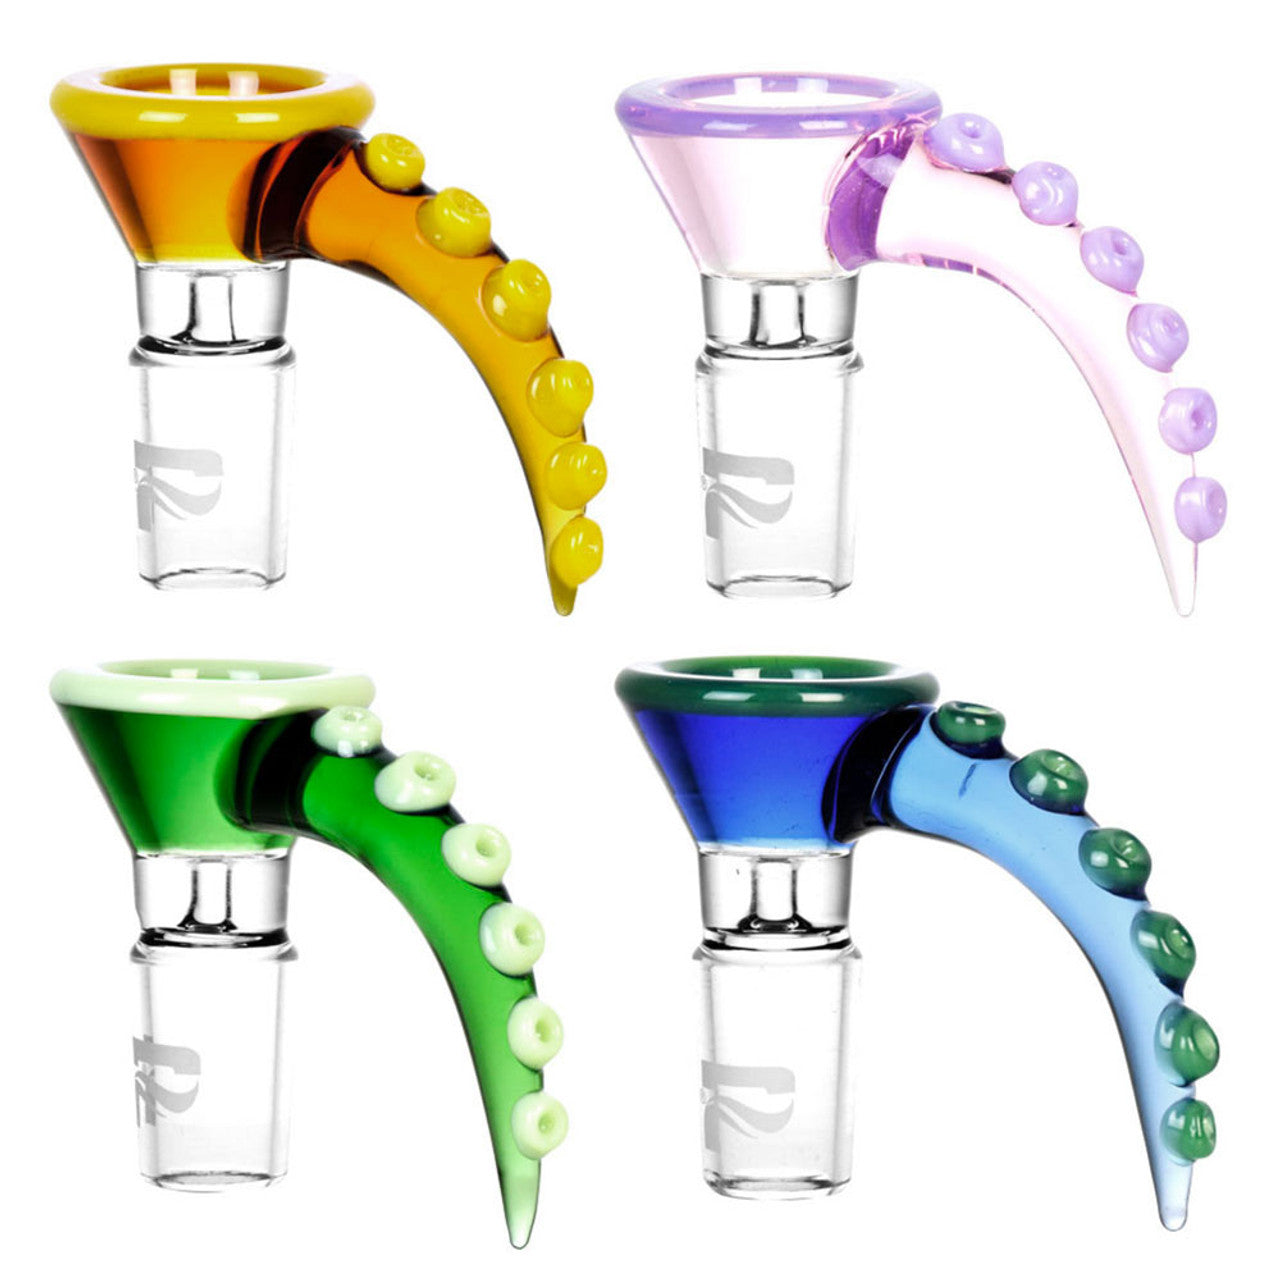 These Pulsar octopus tentacle bowls are made from quality coloured borosilicate glass. With an octopus tentacle style handle, users never have to worry about coming in contact with a heated bowl. Available with 14mm male joint sizes. Colours may vary from images.